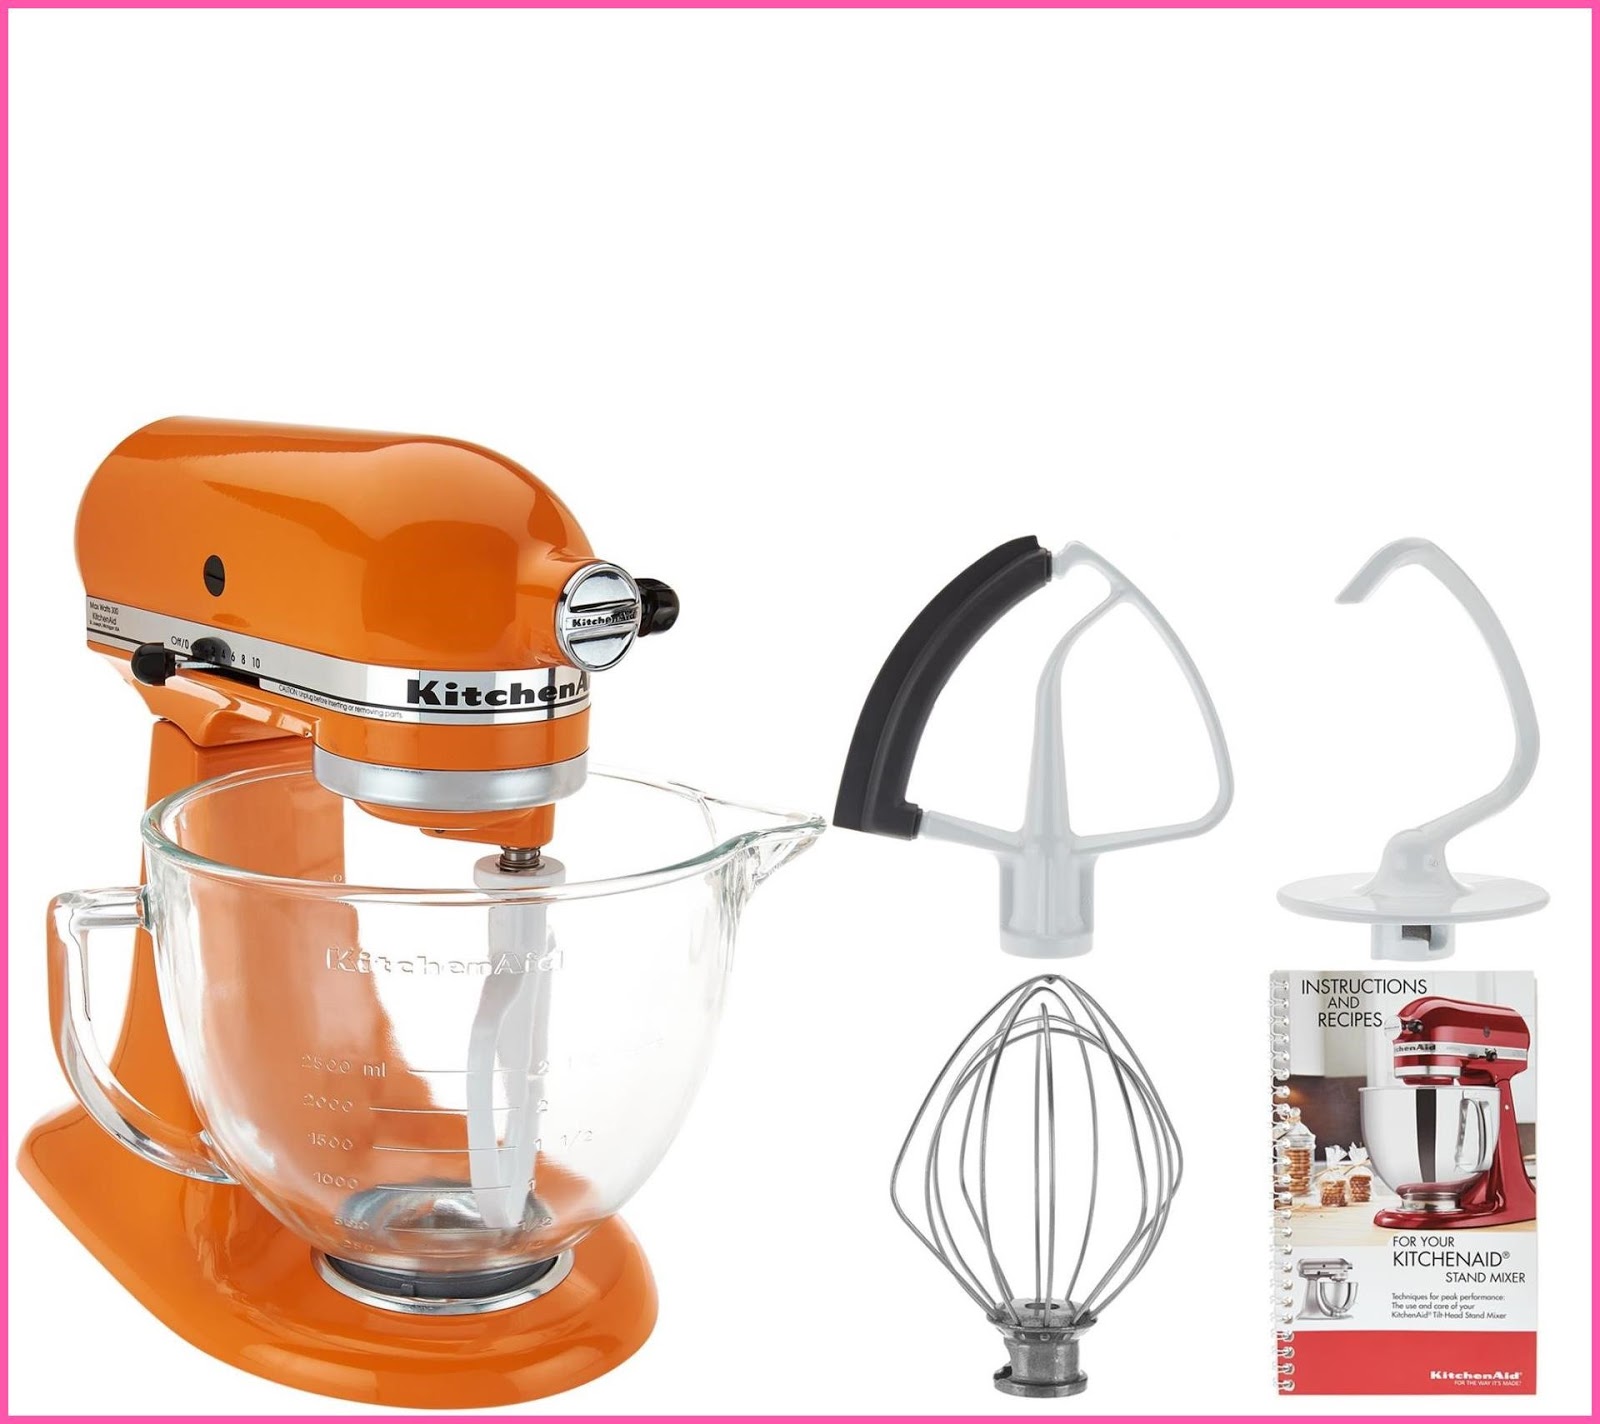 6 Boots Kitchen Appliances Promotional Code Free Delivery KitchenAid â€” KitchenAid Appliances Accessories â€” QVC Boots,Kitchen,Appliances,Promotional,Code,Free,Delivery